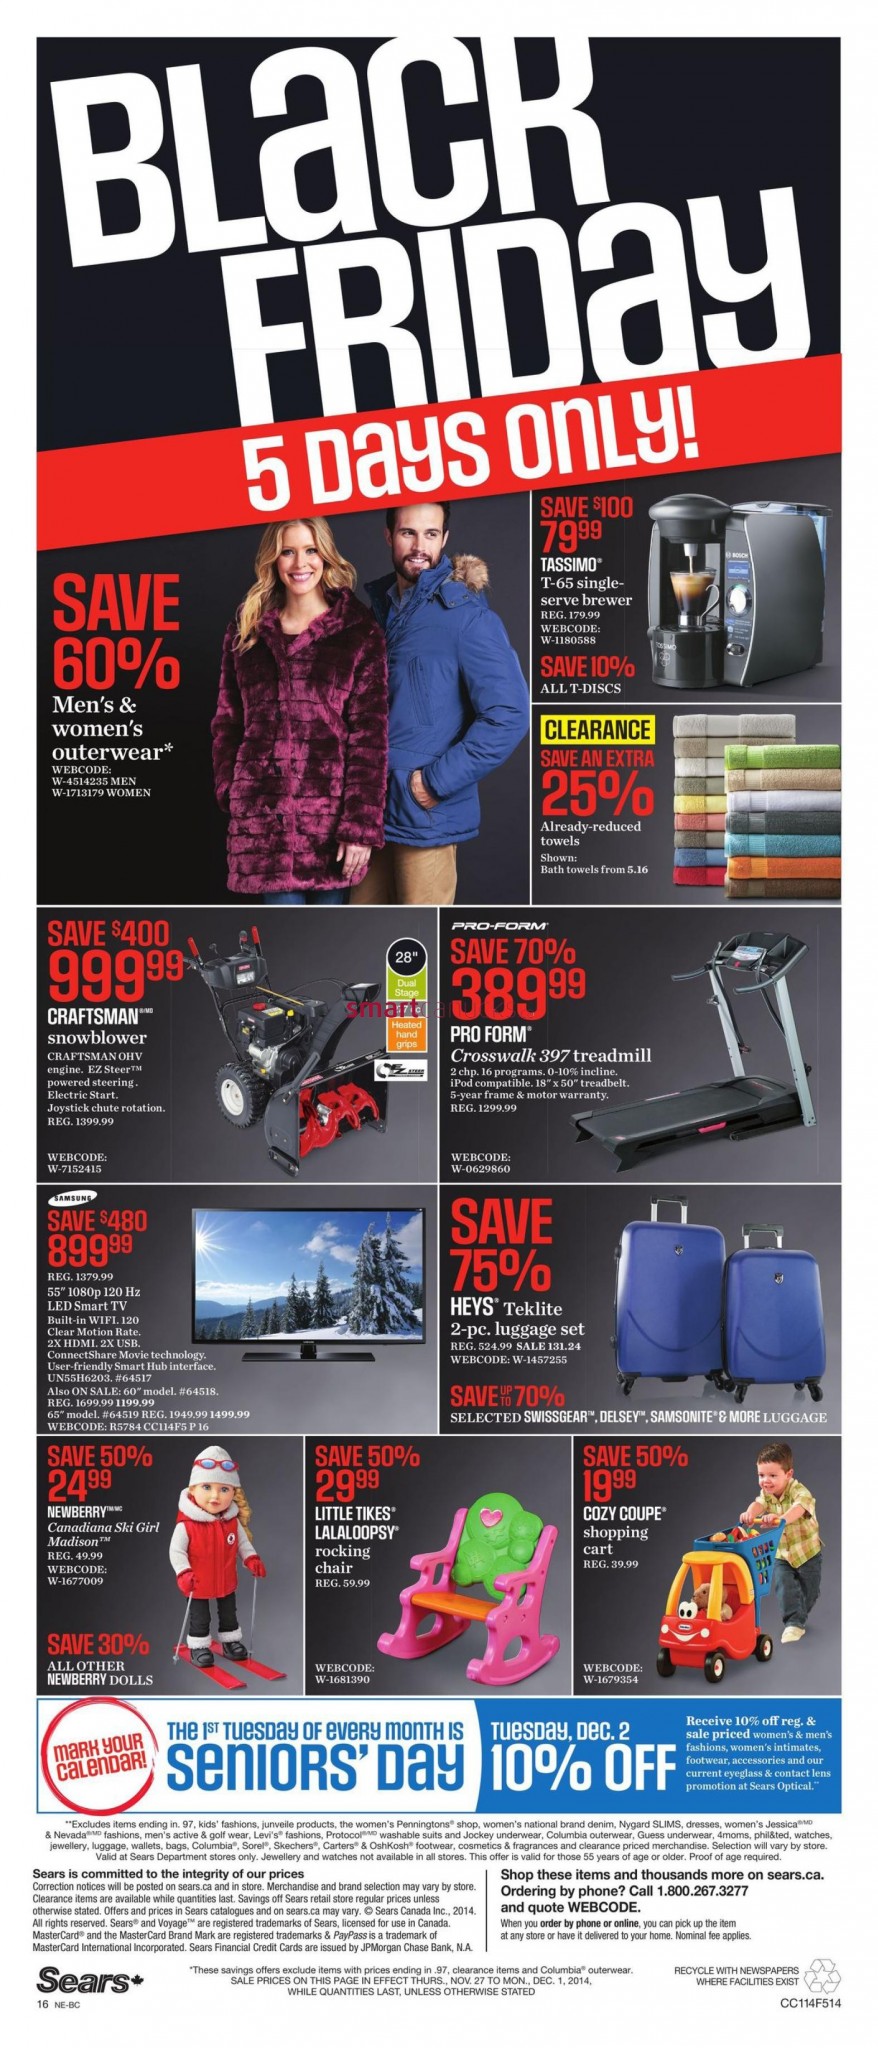 Sears Black Friday Canada 2014 Full Flyer, Sales and Deals › Black - When Do Sears Black Friday Deals